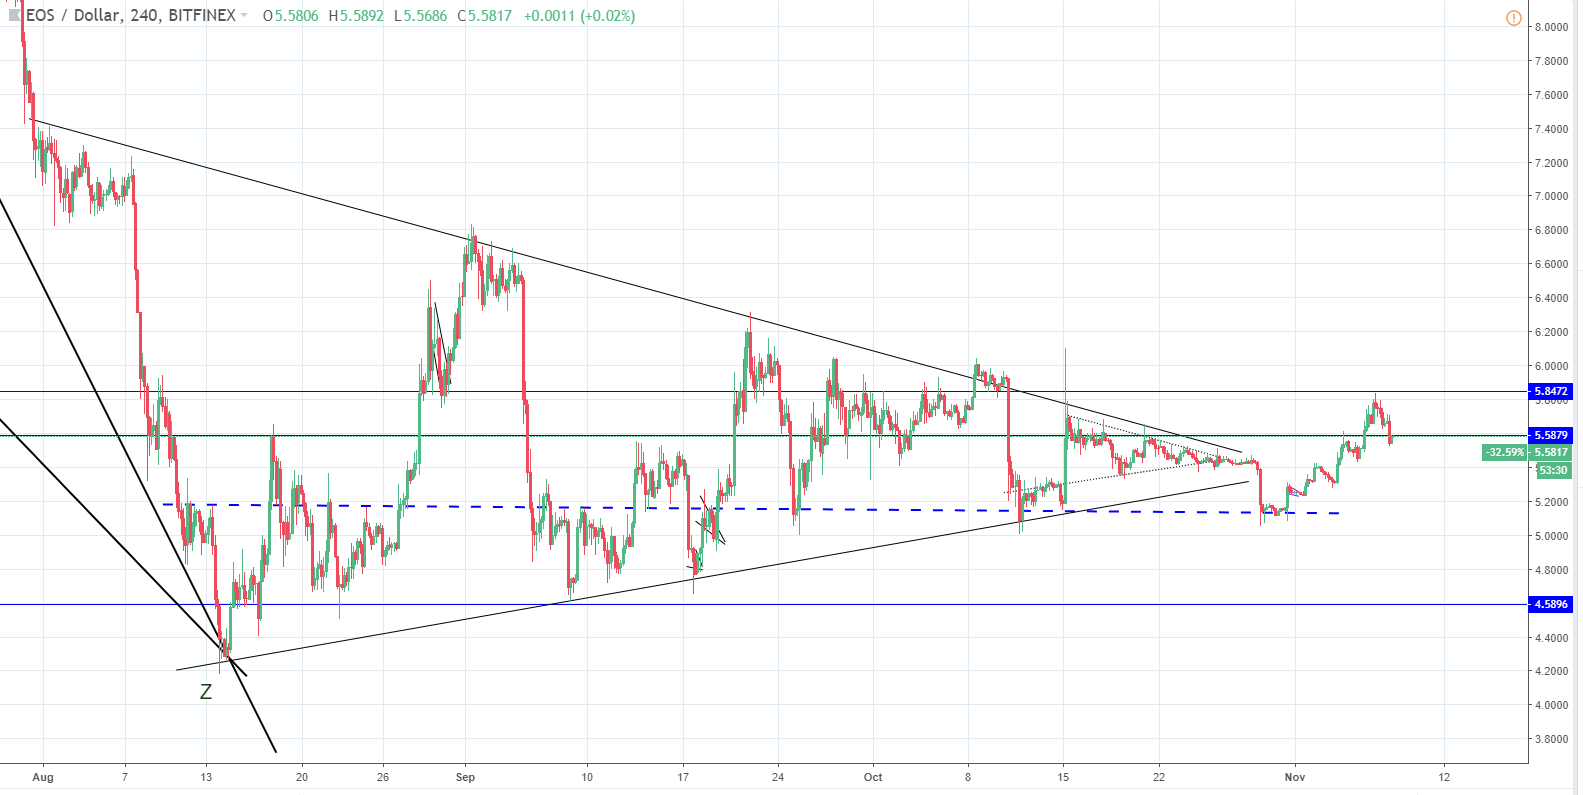 LTC/USD and EOS/USD in a corrective stage